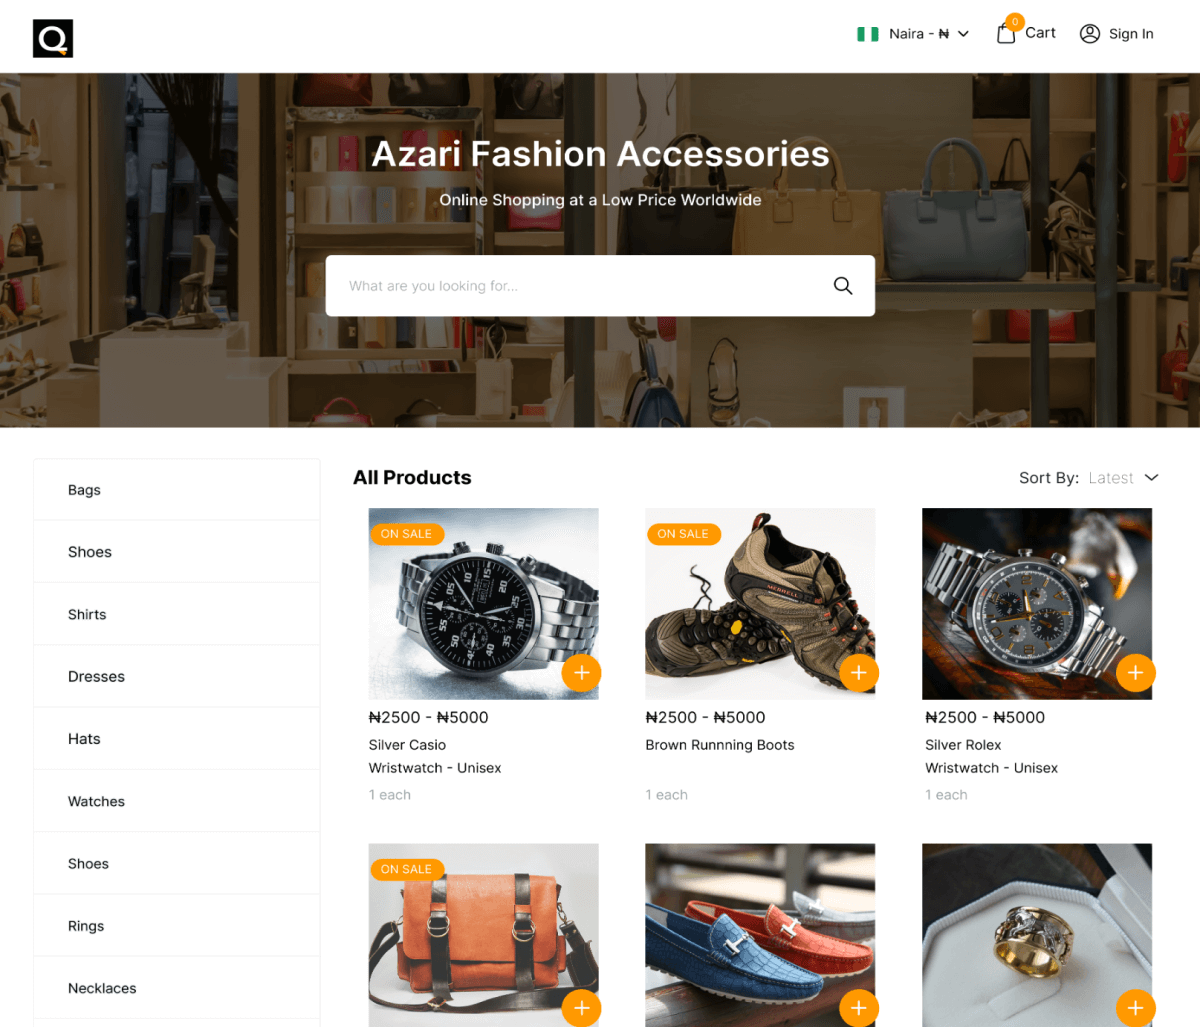 QShop - your e-commerce business partner, get your own e-commerce store, start for free